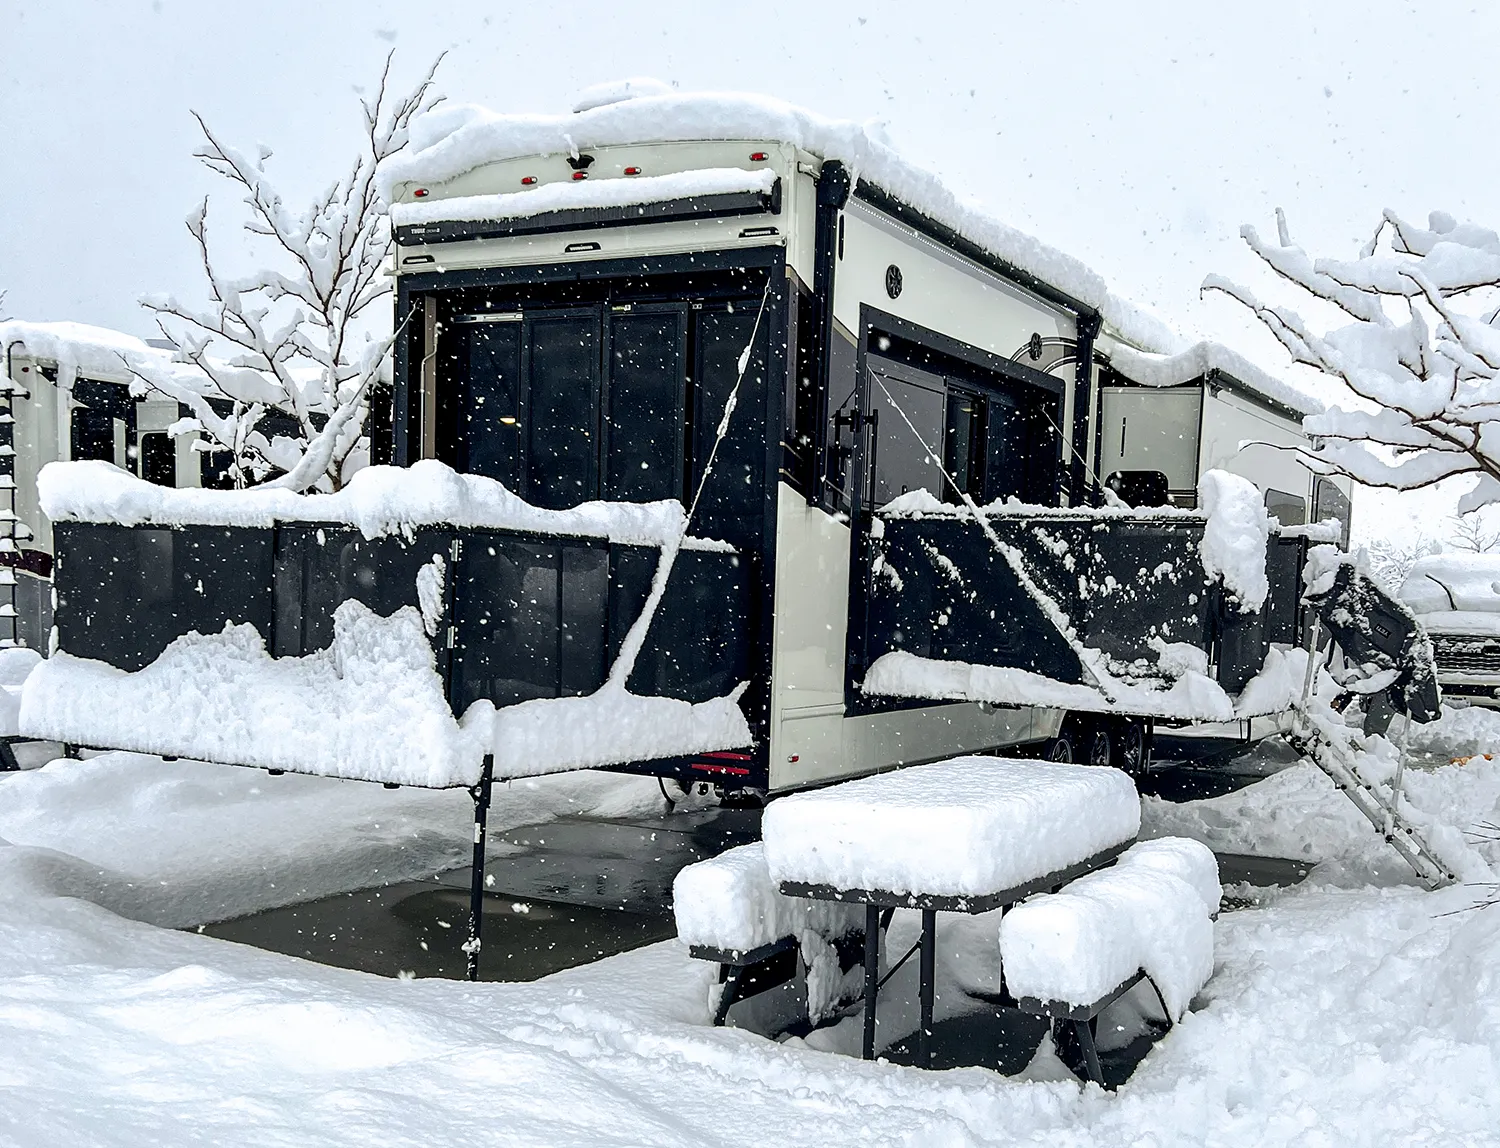 Luxe 5th Wheel Toy Hauler insulation keeps this RV warm during a blizzard.